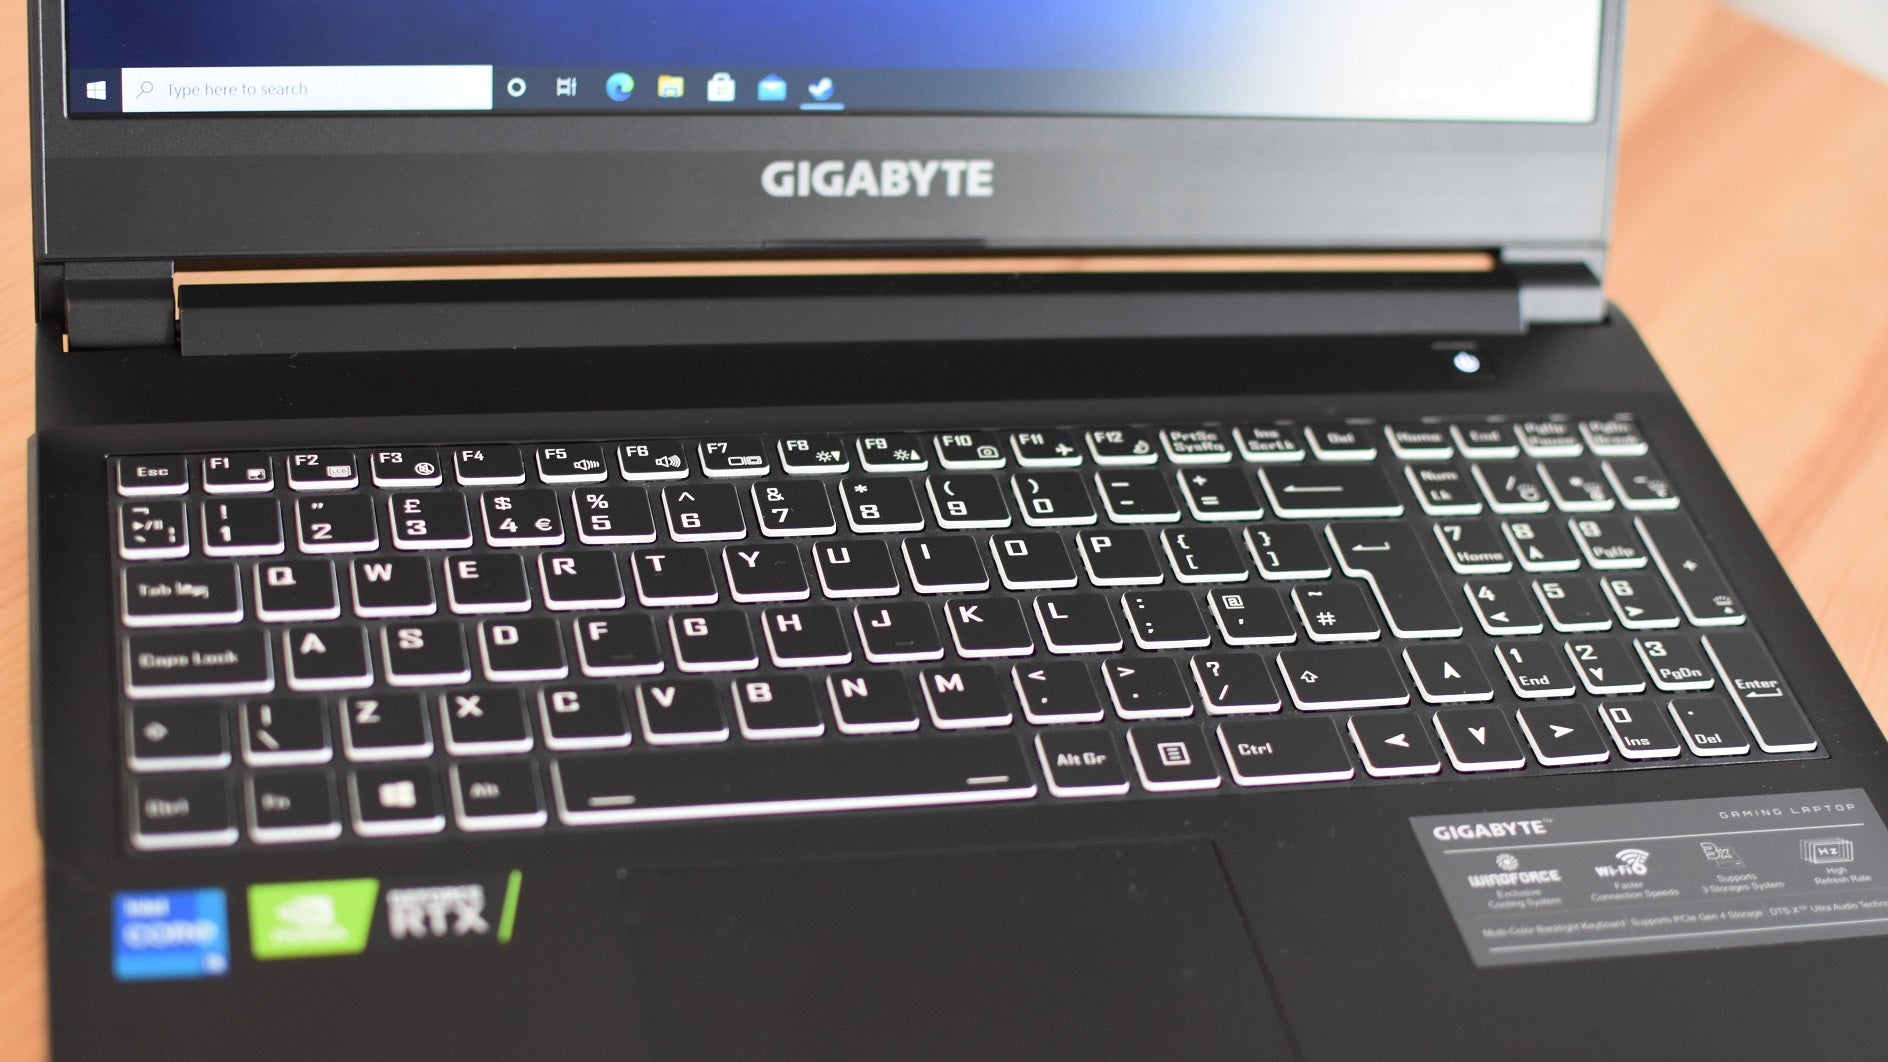 The Gigabyte G5 gaming laptop's keyboard, with its white backlighting turned on.